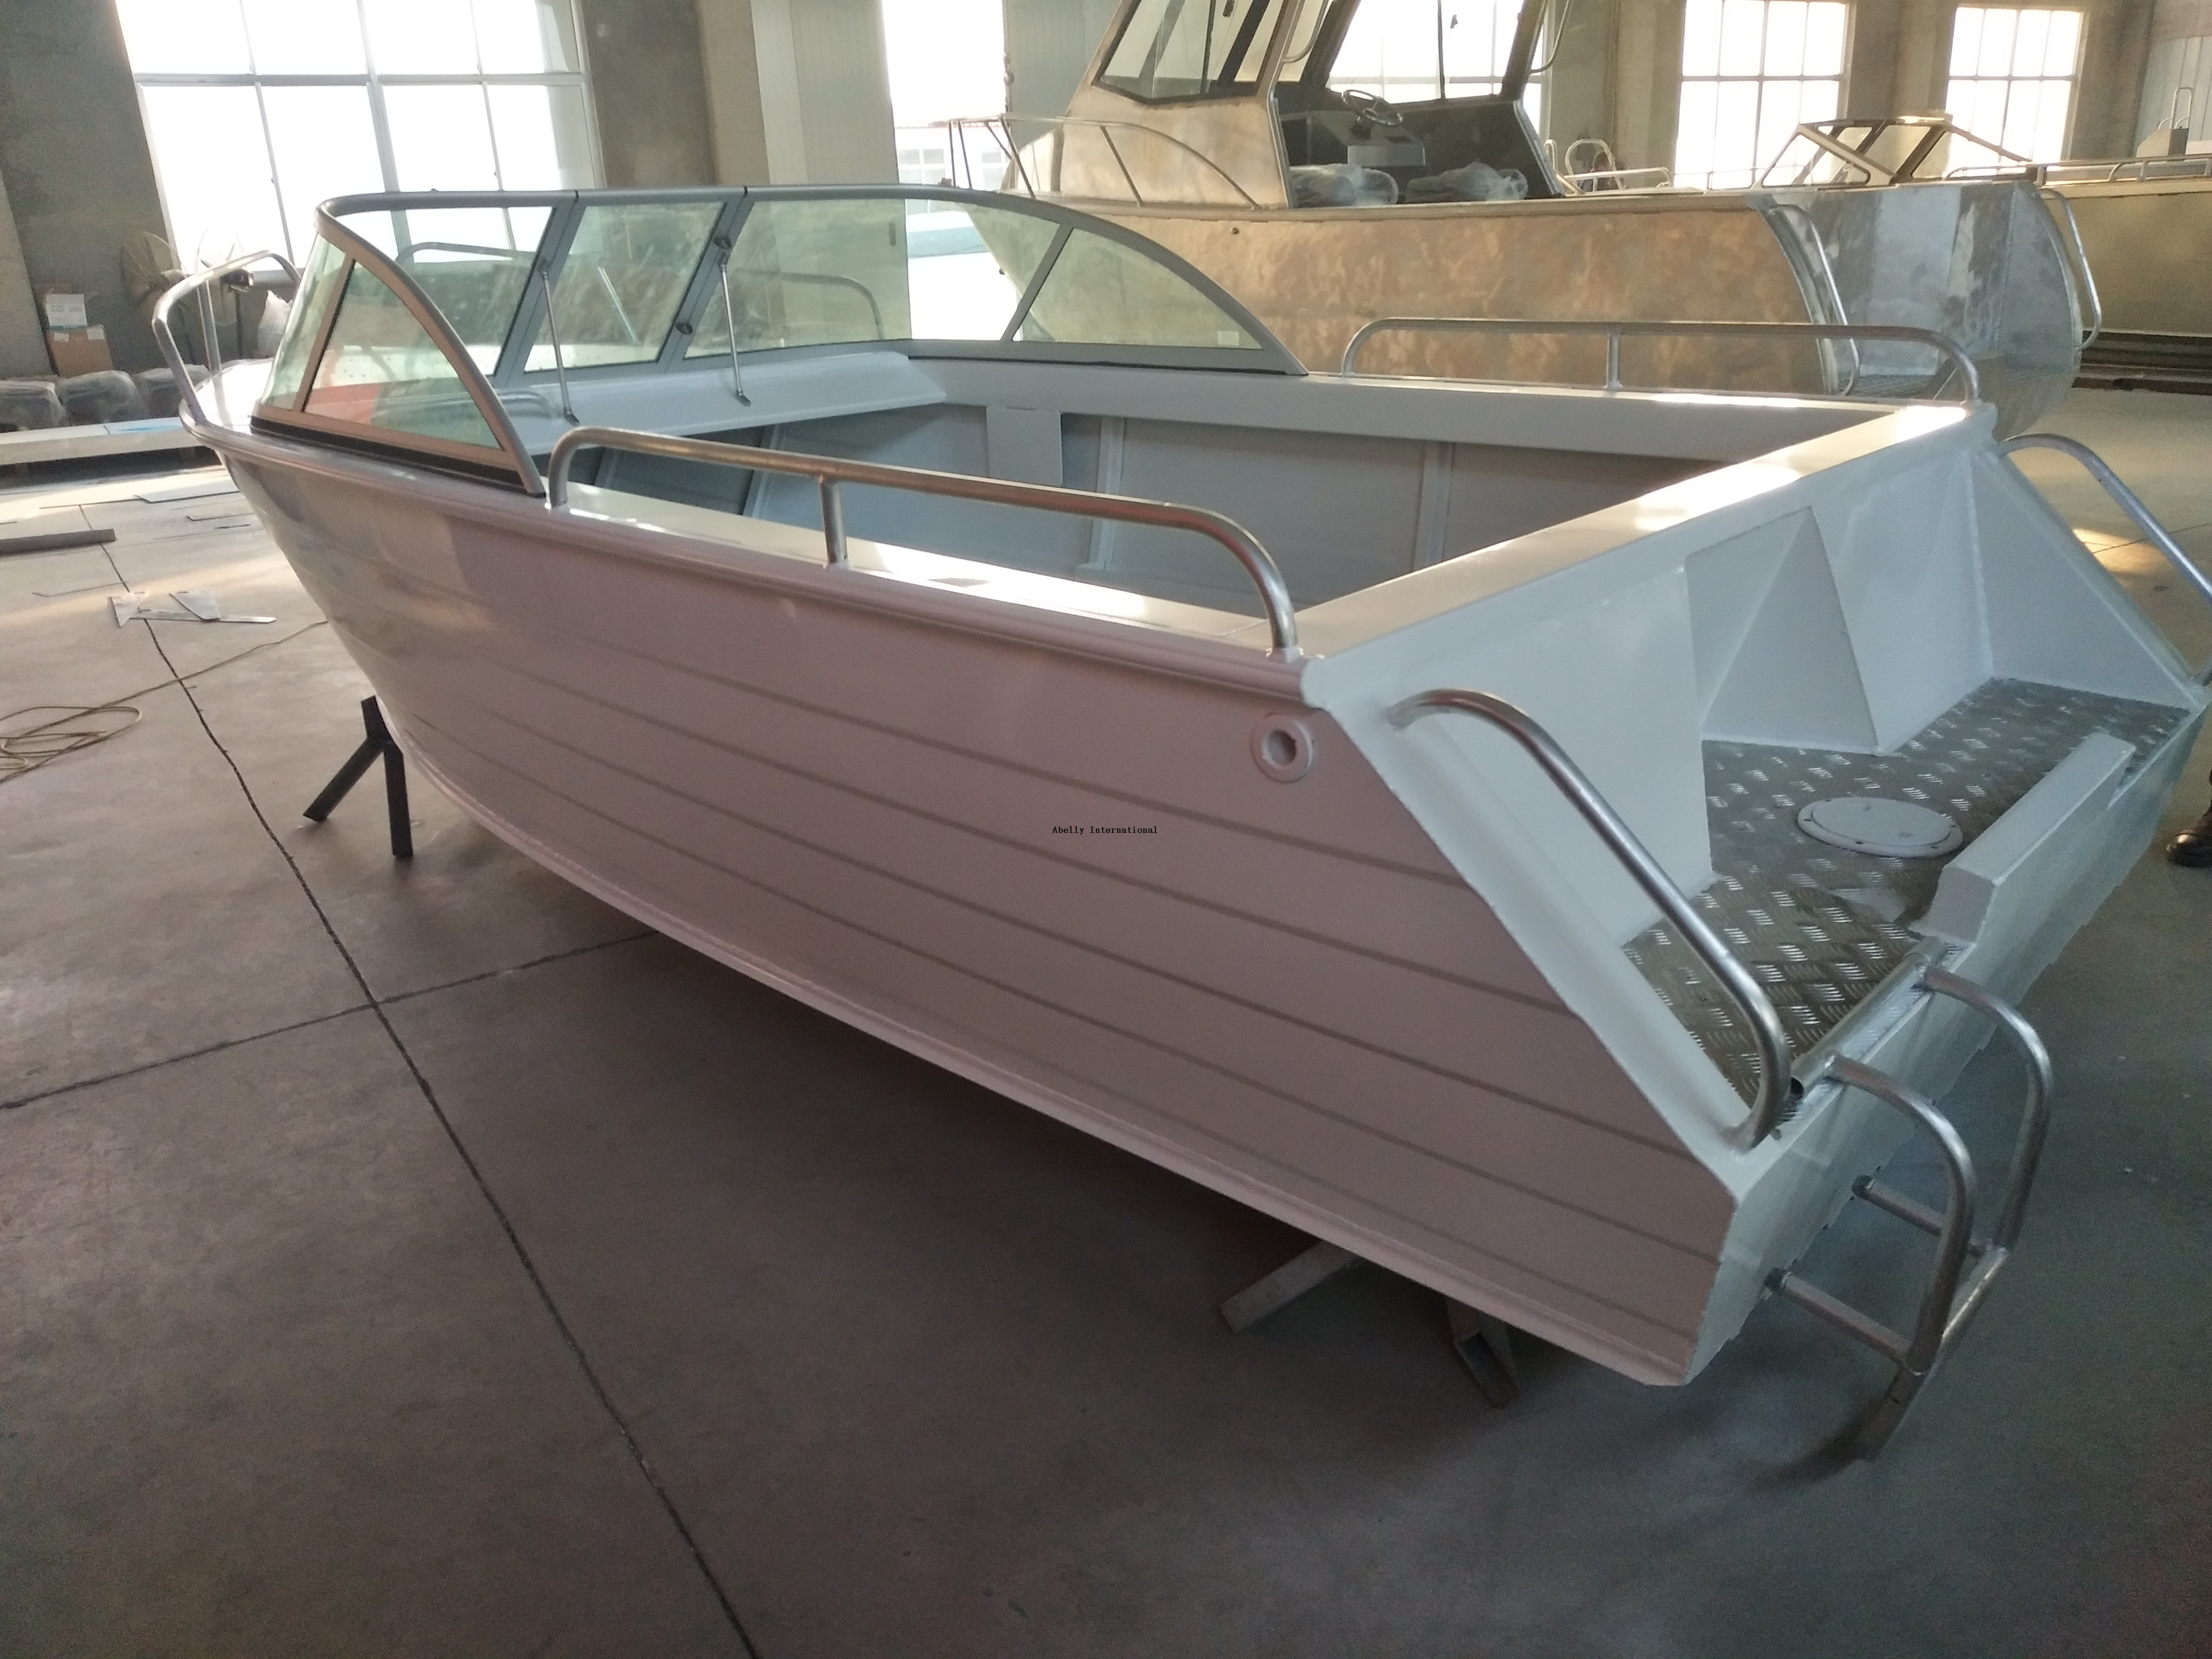 Abelly Aluminum All welded 485R Runabout Boat